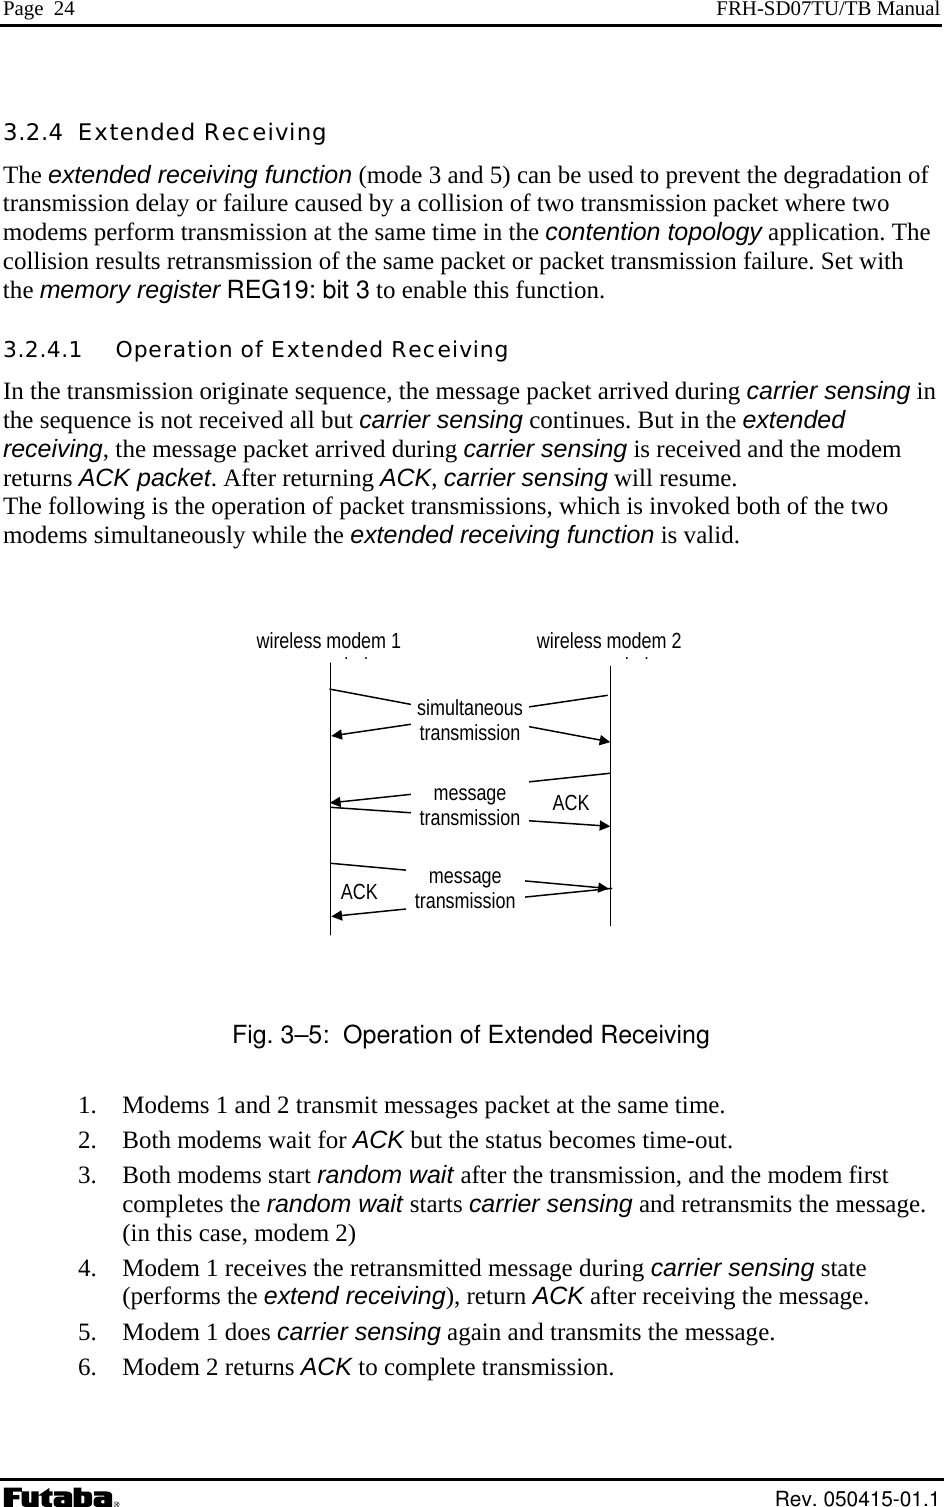 Page  24  FRH-SD07TU/TB Manual 3.2.4  Extended Receiving The extended receiving function (mode 3 and 5) can be used to prevent the degradation of  transmission delay or failure caused by a collision of two transmission packet where two modems perform transmission at the same time in the contention topology application. The collision results retransmission of the same packet or packet transmission failure. Set with the memory register REG19: bit 3 to enable this function. 3.2.4.1   Operation of Extended Receiving In the transmission originate sequence, the message packet arrived during carrier sensing in the sequence is not received all but carrier sensing continues. But in the extended receiving, the message packet arrived during carrier sensing is received and the modem returns ACK packet. After returning ACK, carrier sensing will resume. The following is the operation of packet transmissions, which is invoked both of the two modems simultaneously while the extended receiving function is valid.   message transmissionmessage transmissionsimultaneous transmissionwireless modem 2  il  wireless modem 1  il  ACKACK Fig. 3–5:  Operation of Extended Receiving 1.   Modems 1 and 2 transmit messages packet at the same time. 2.   Both modems wait for ACK but the status becomes time-out. 3.   Both modems start random wait after the transmission, and the modem first completes the random wait starts carrier sensing and retransmits the message. (in this case, modem 2) 4.   Modem 1 receives the retransmitted message during carrier sensing state (performs the extend receiving), return ACK after receiving the message. 5.   Modem 1 does carrier sensing again and transmits the message. 6.   Modem 2 returns ACK to complete transmission.  Rev. 050415-01.1 